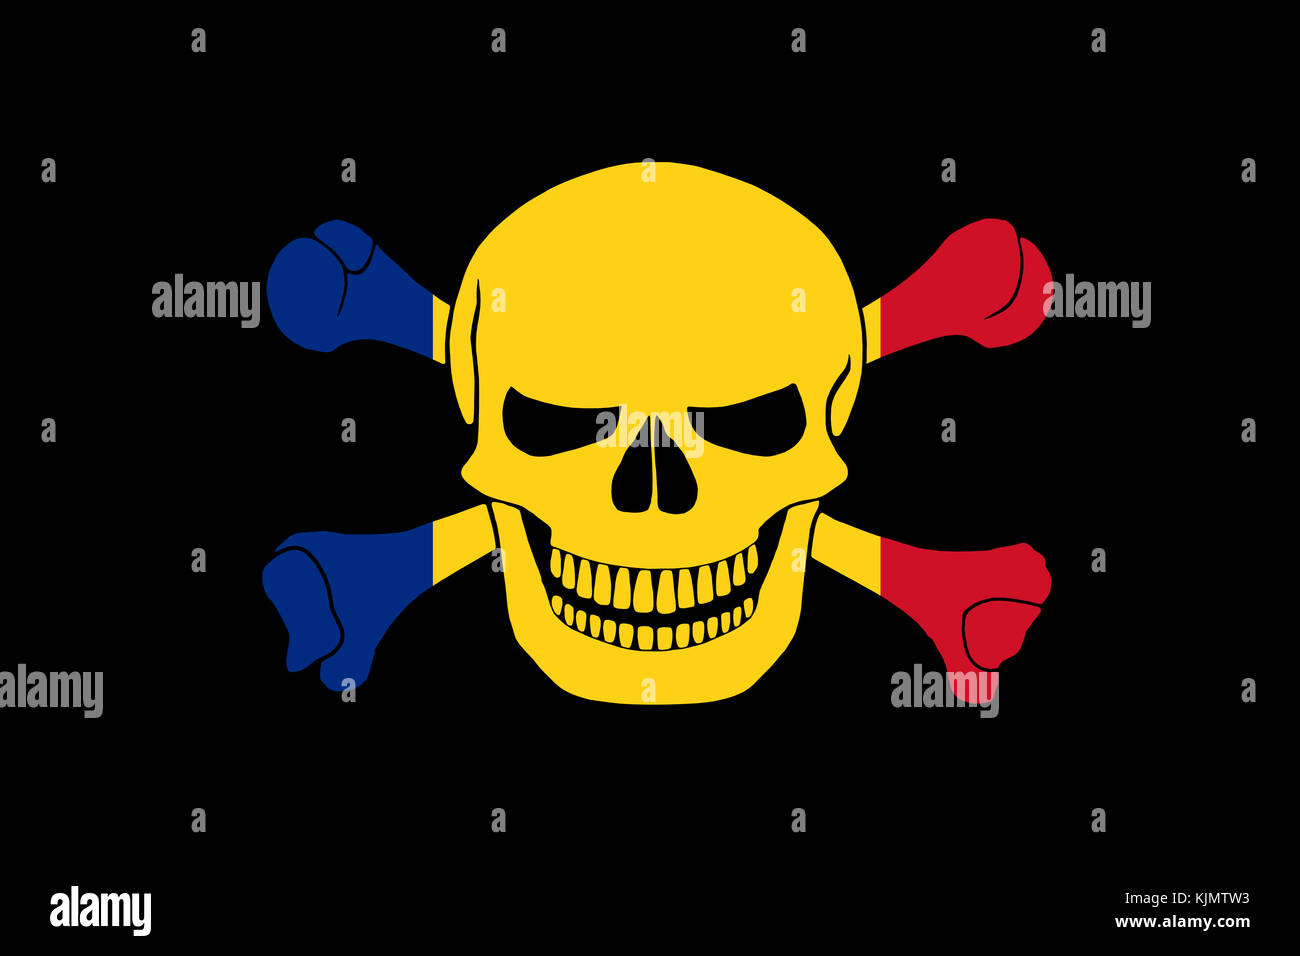 Black pirate flag with the image of Jolly Roger with crossbones combined with colors of the Romanian flag Stock Photo